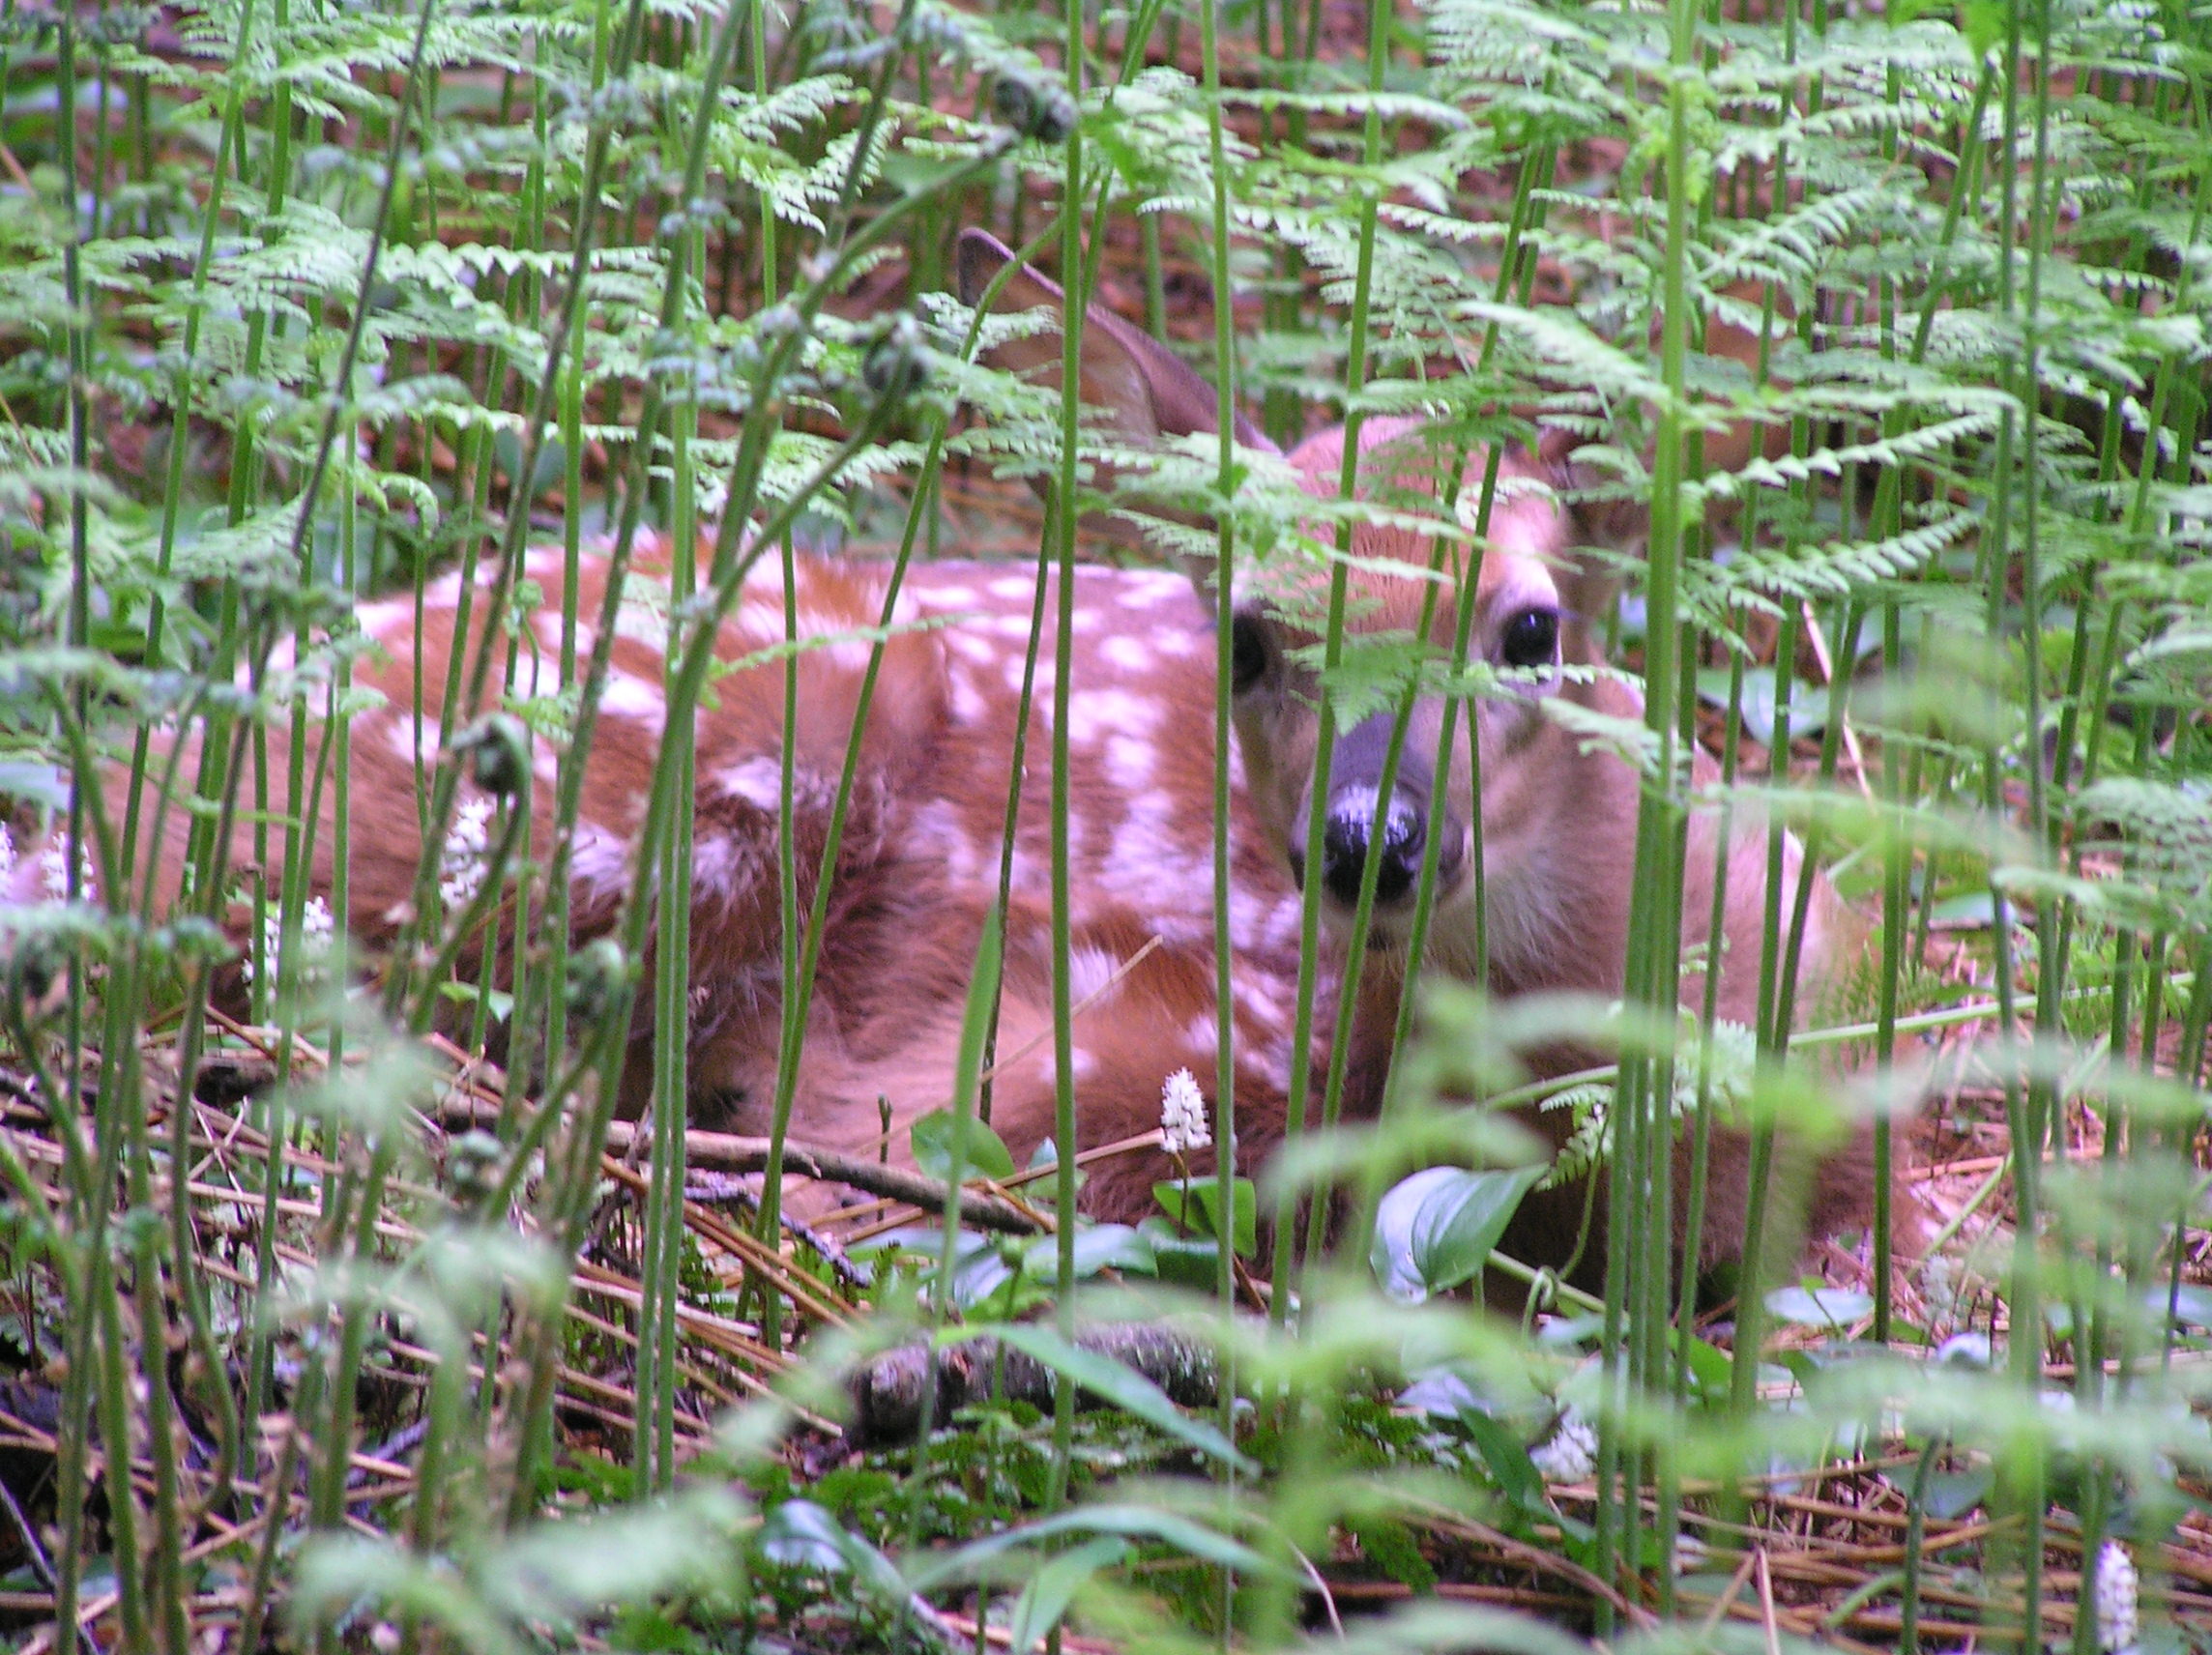 A fawn crouched in tall green grass